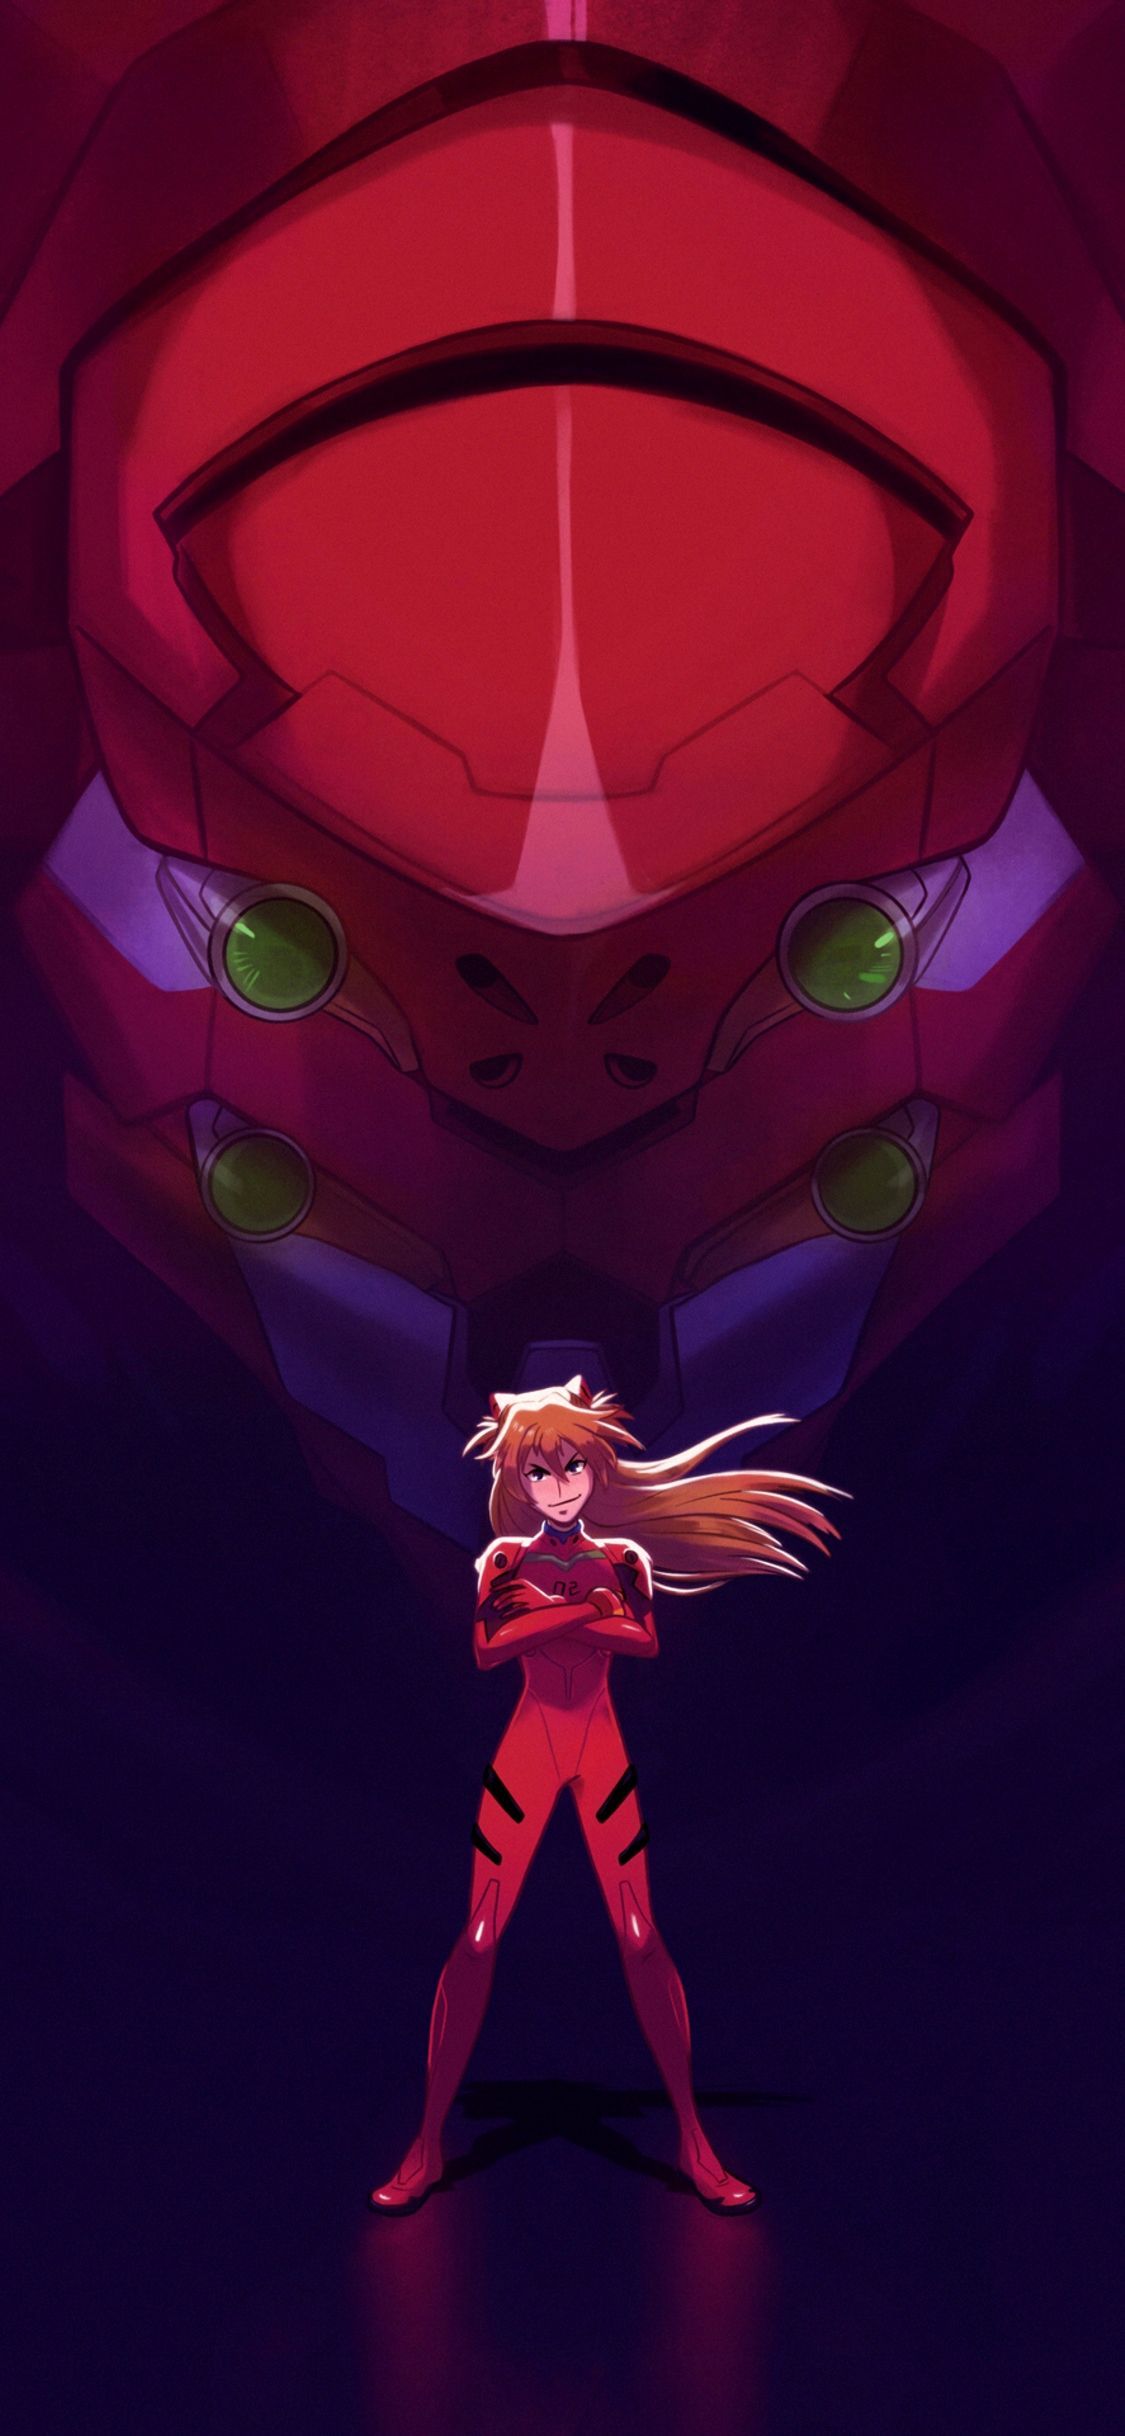 Asuka And Her Unit 02 From Evangelion iPhone Xs Evangelion Wallpaper 4K iPhone. Evangelion, iPhone cartoon, Wallpaper